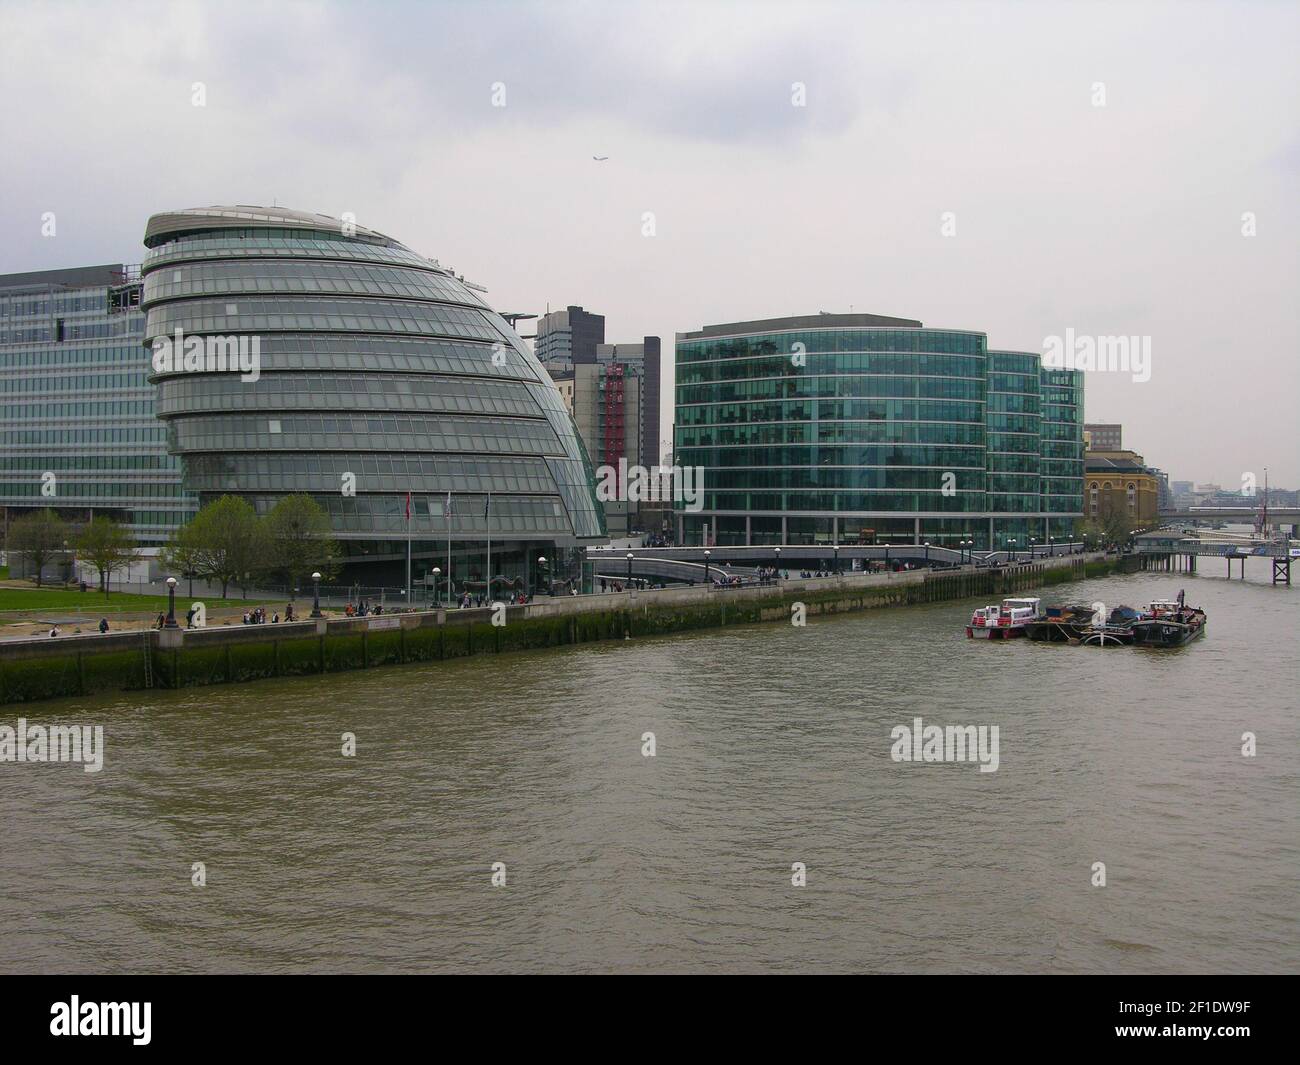 A General View Of The Current City Hall Building Located Near Tower Bridge On The South Bank Of The River Thames In Southwark Mayor Of London Sadiq Khan Has Announced That The